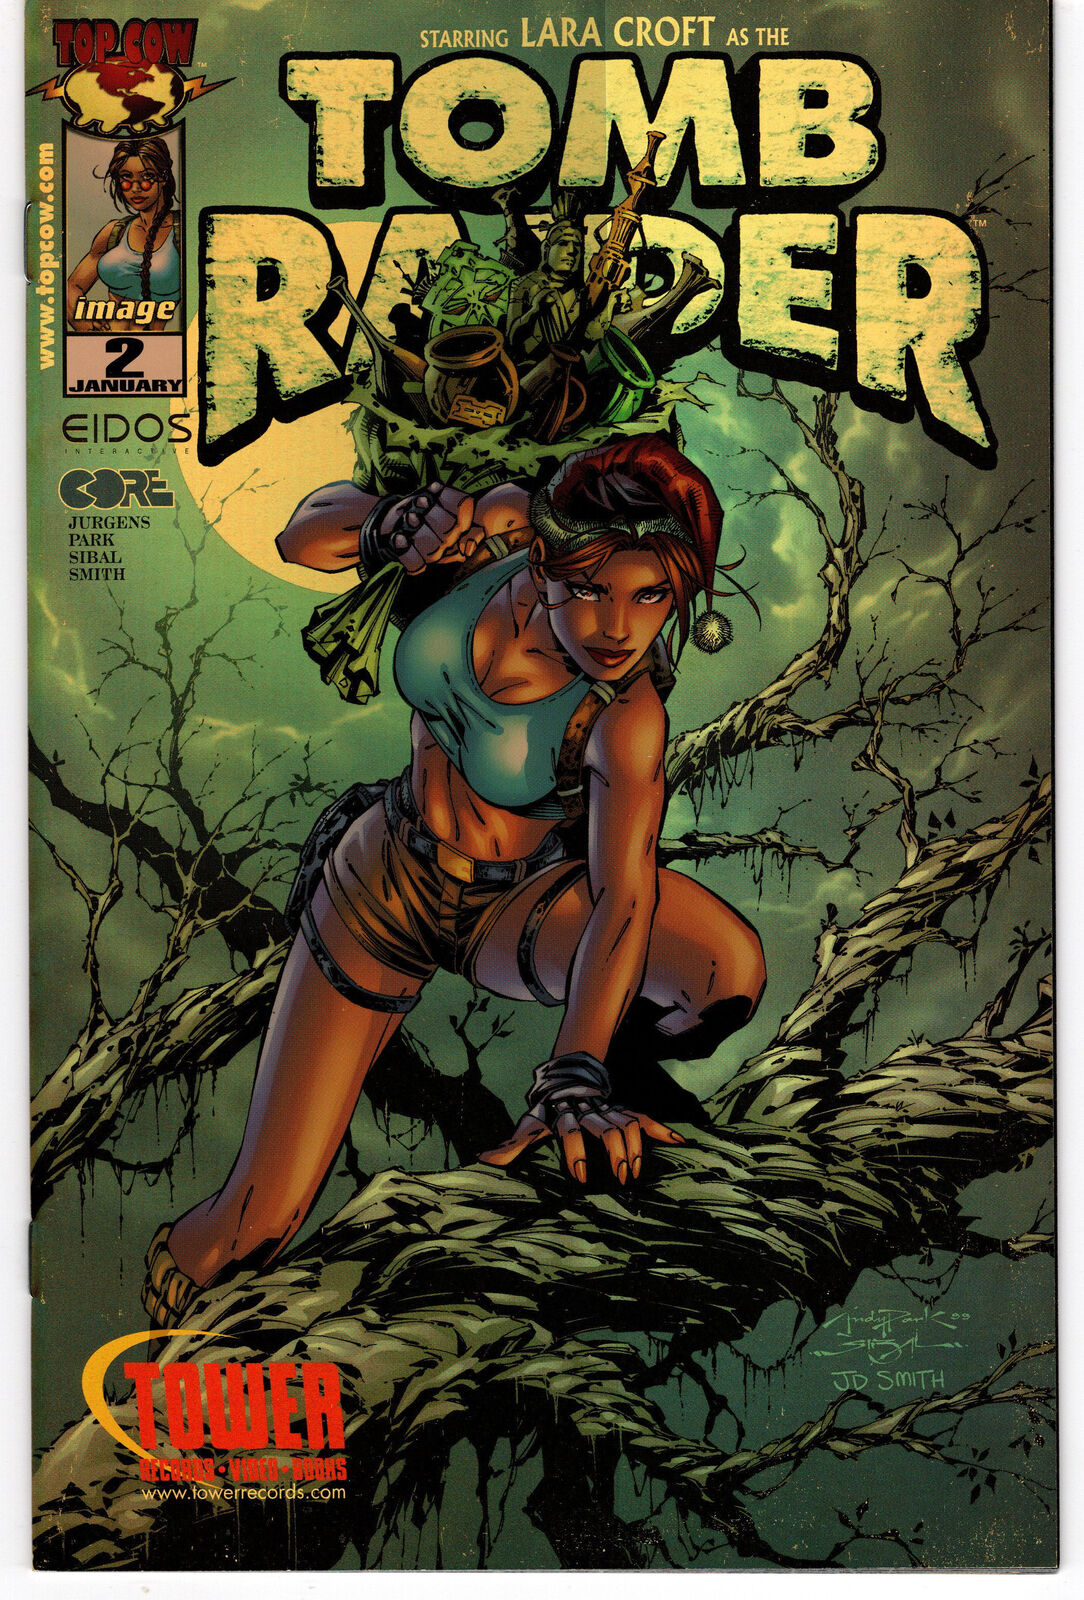 Tomb Raider: The Series #2 (1999) NM+ Andy Park Tower Records Holofoil Cover